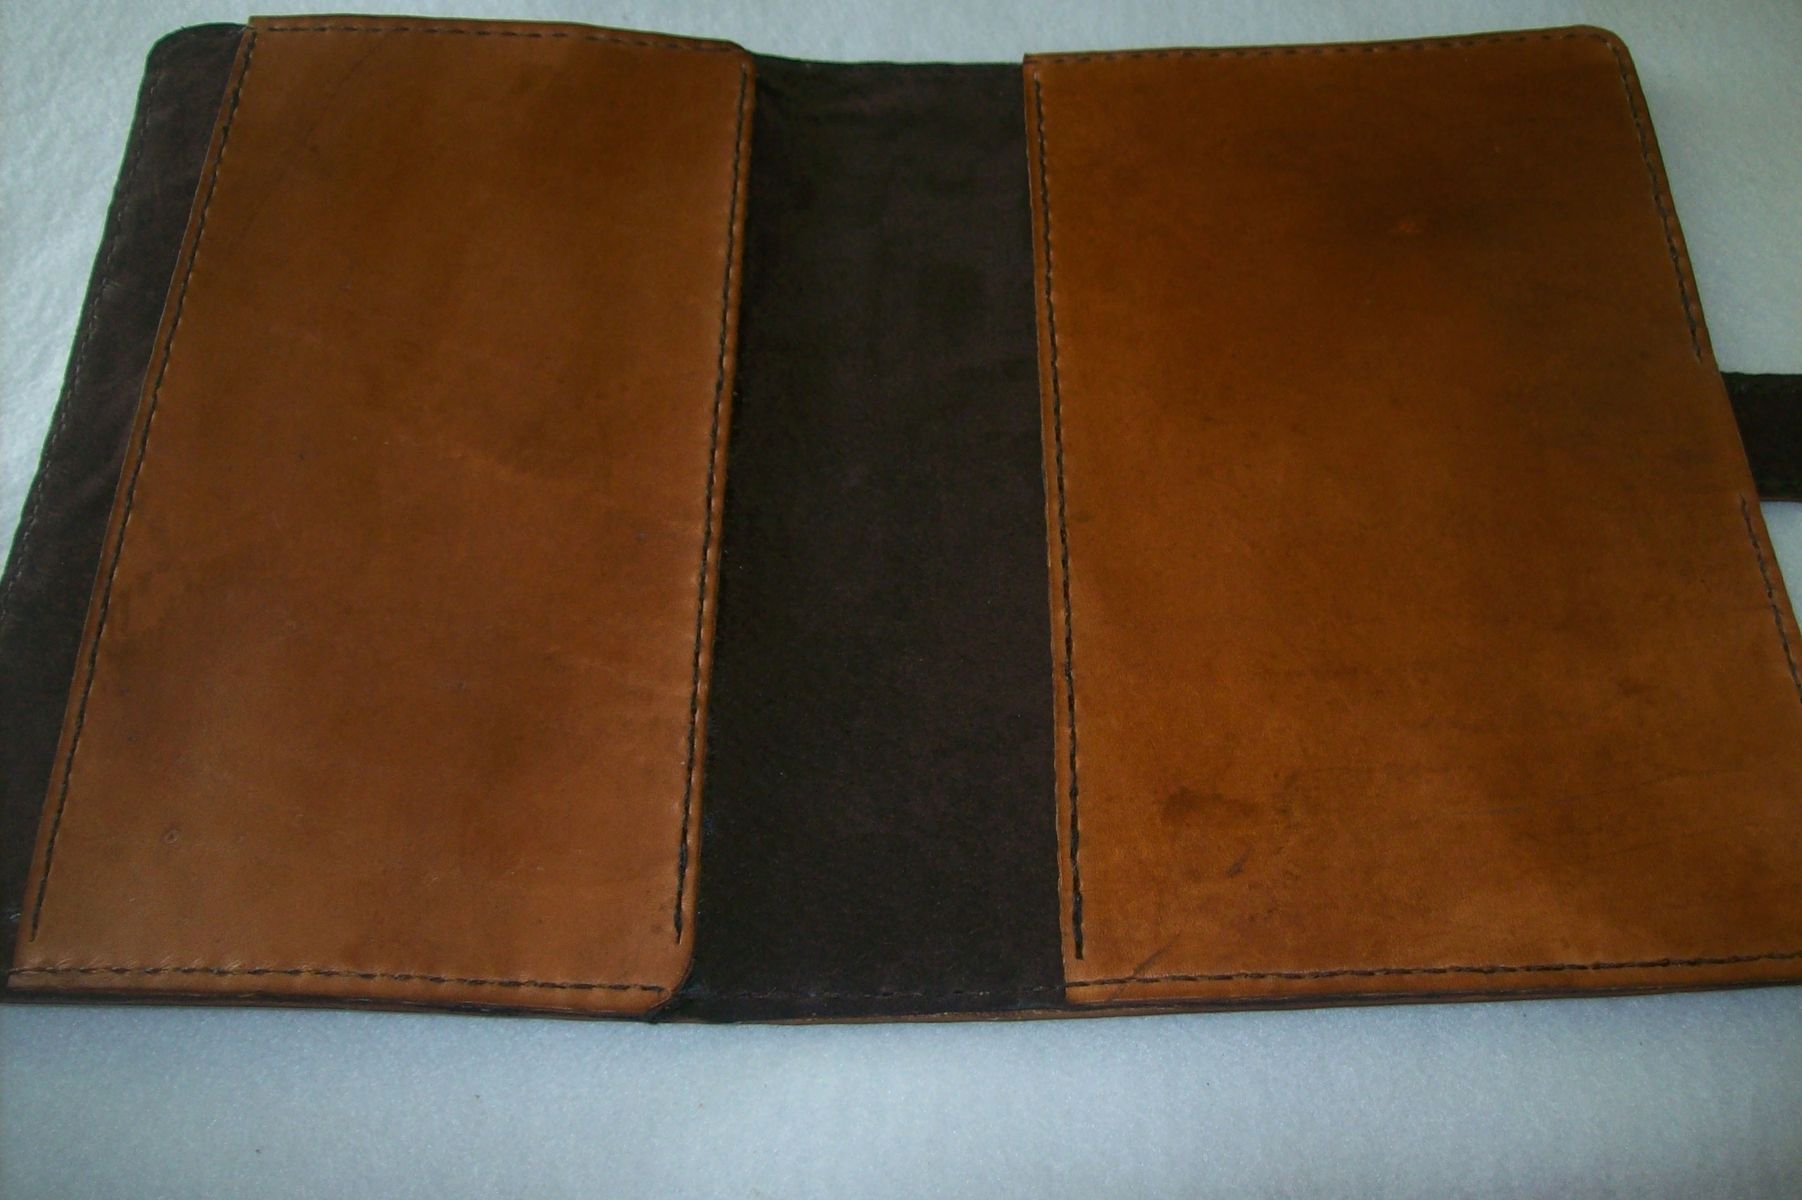 buy-custom-leather-book-cover-for-two-books-made-to-order-from-kerry-s